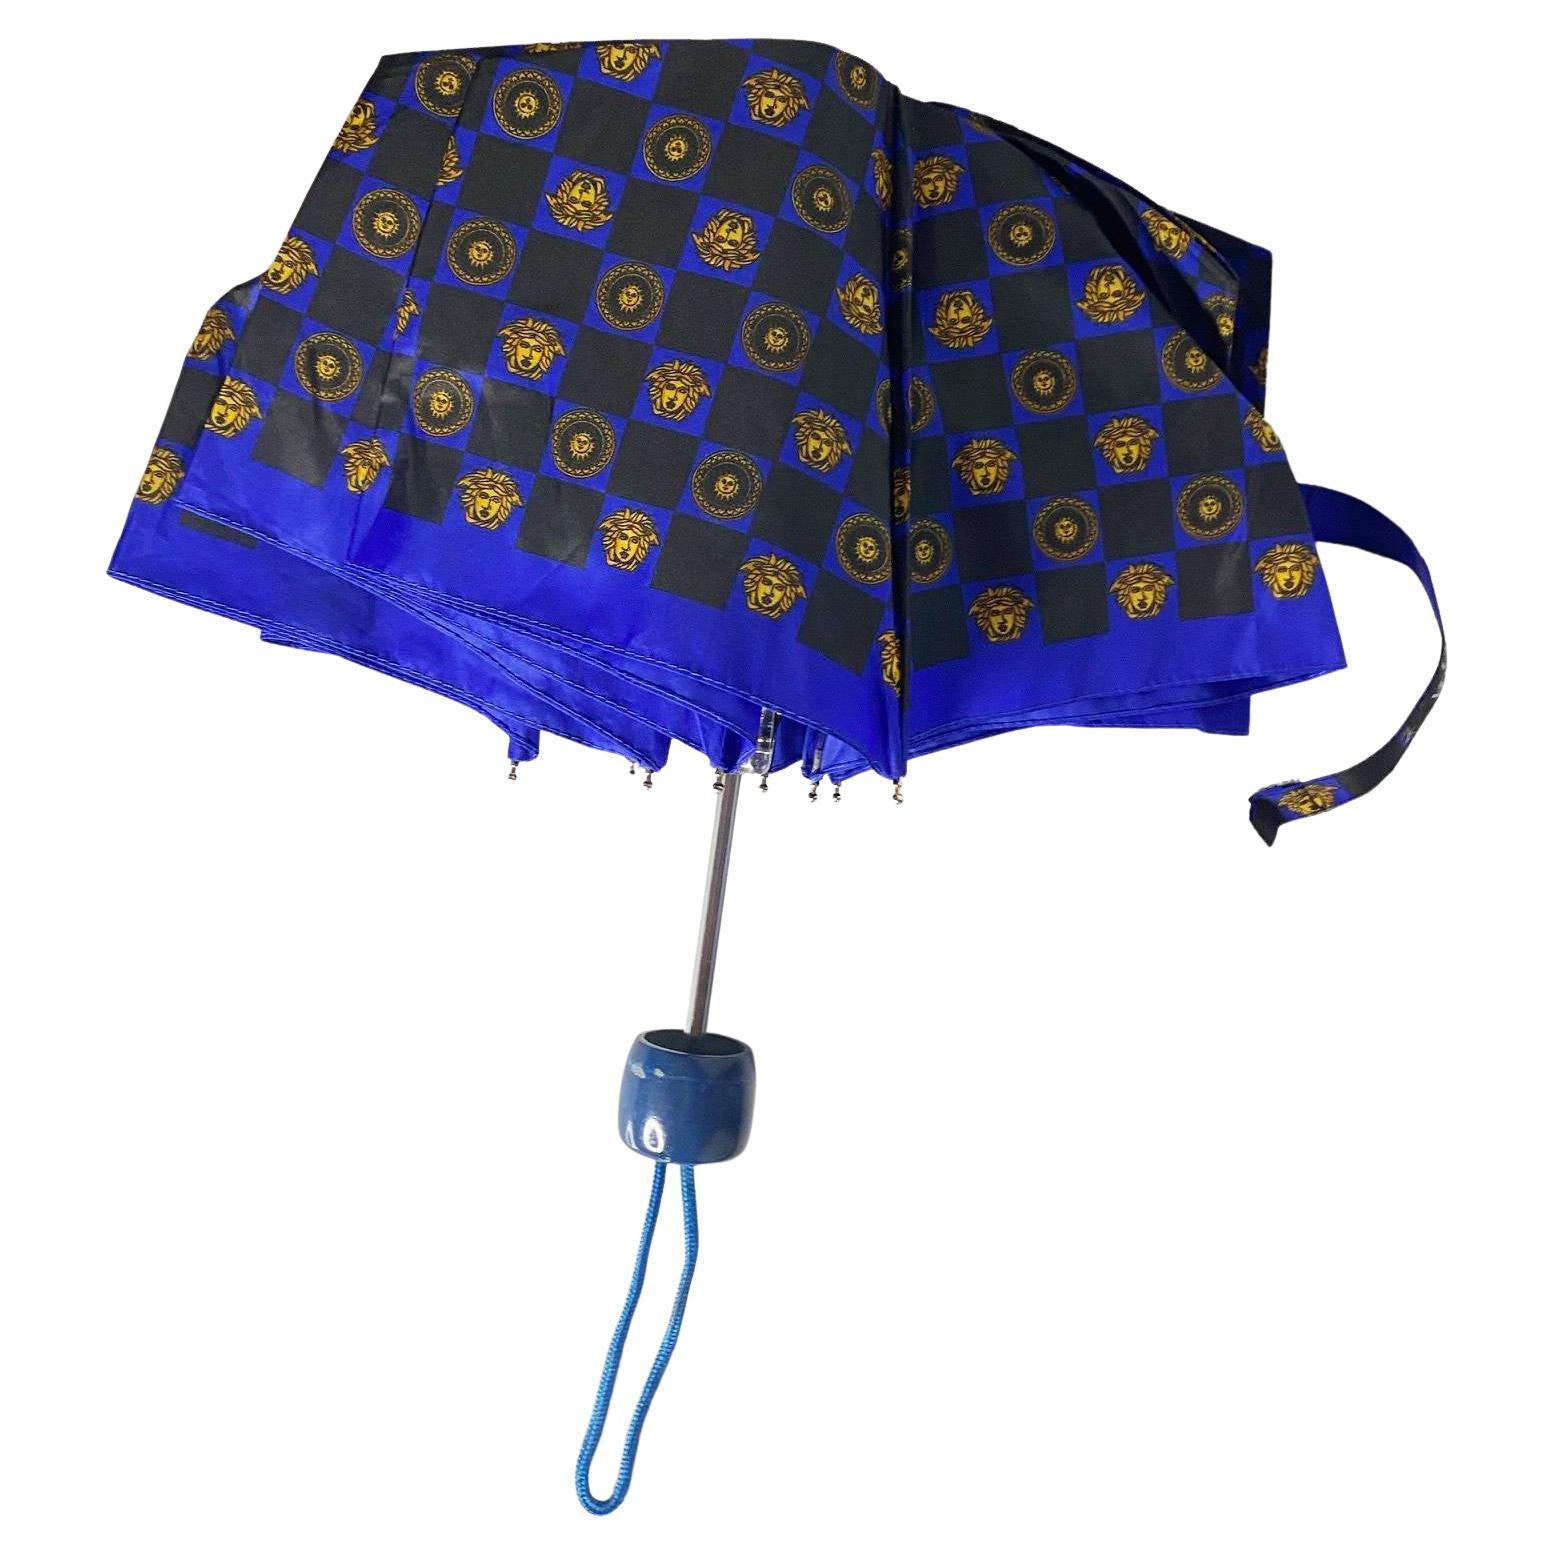 This 1980s Gianni Versace Medusa Blue classic umbrella features a timeless design that was crafted with premium materials to provide you with an umbrella that will last for years to come. base

Condition: 1980s, vintage in very good status, some